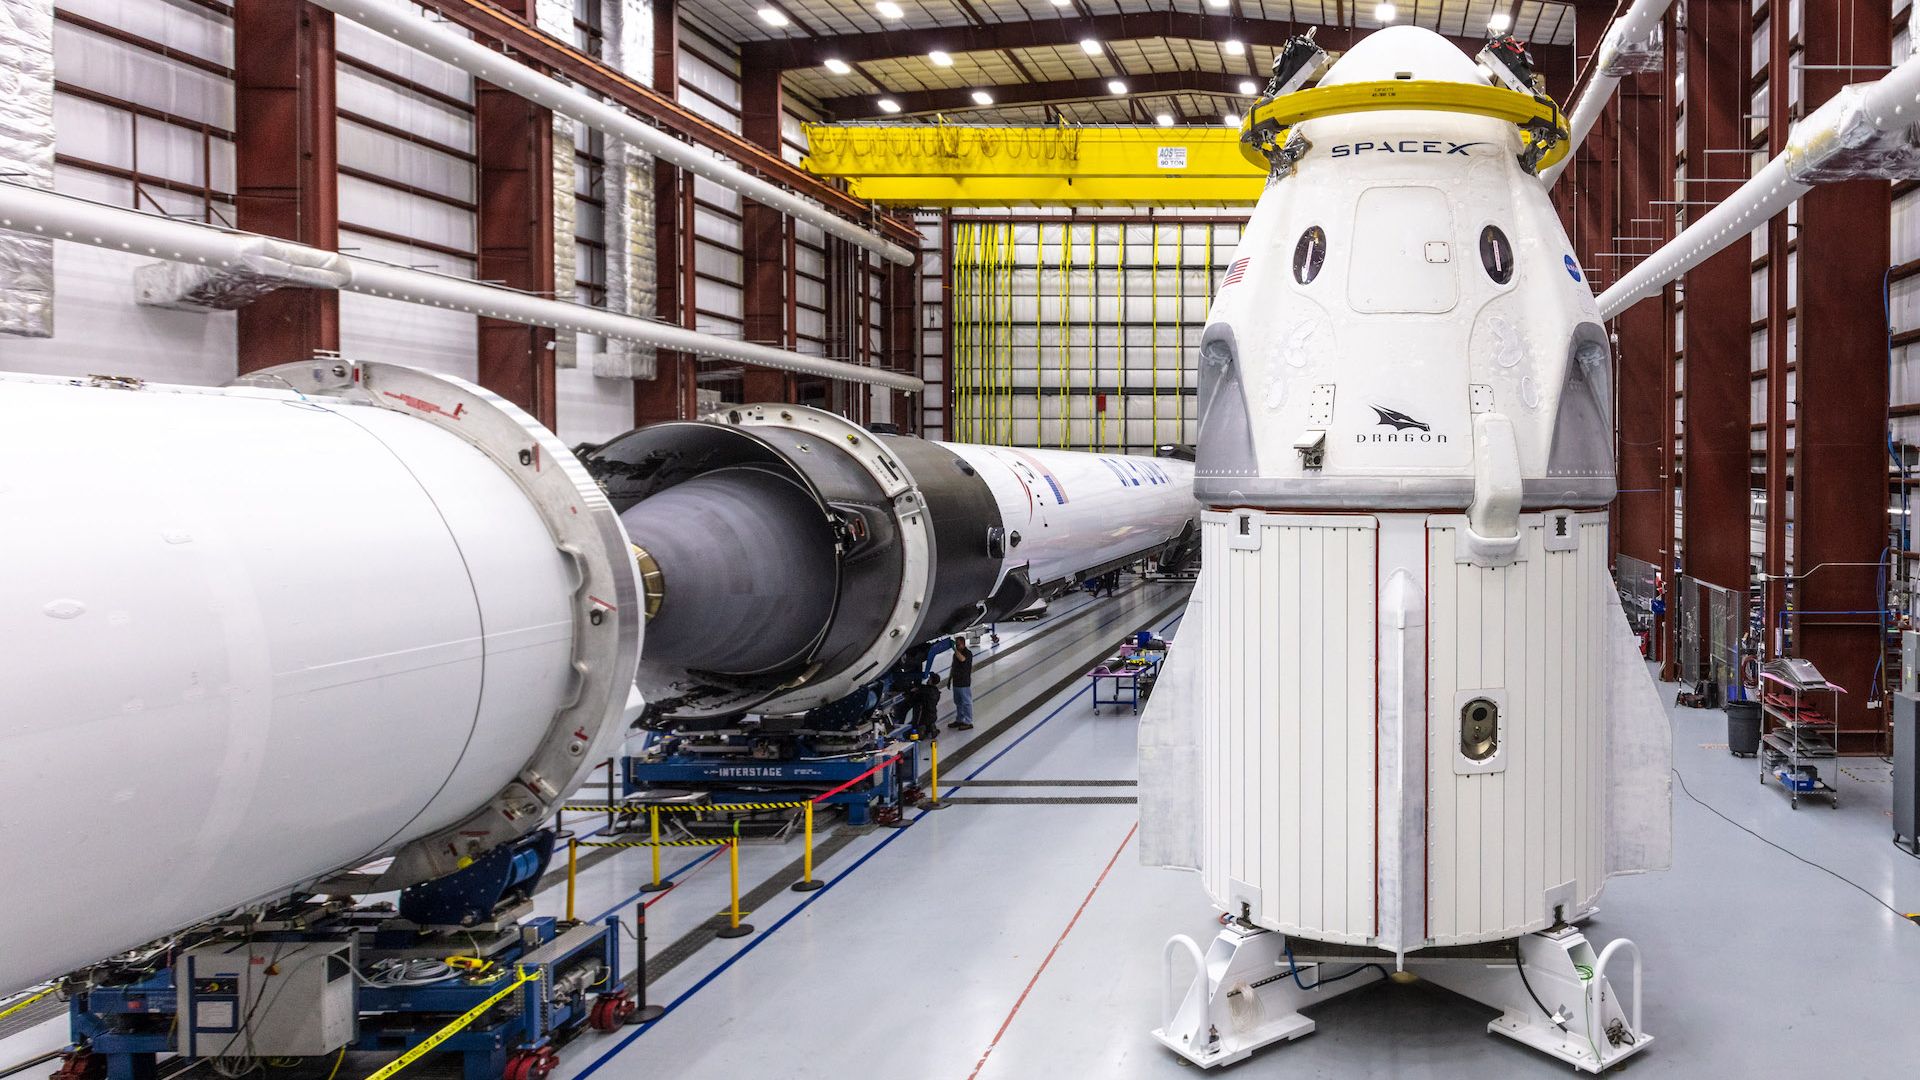 SpaceX's Crew Dragon capsule ahead of launch.